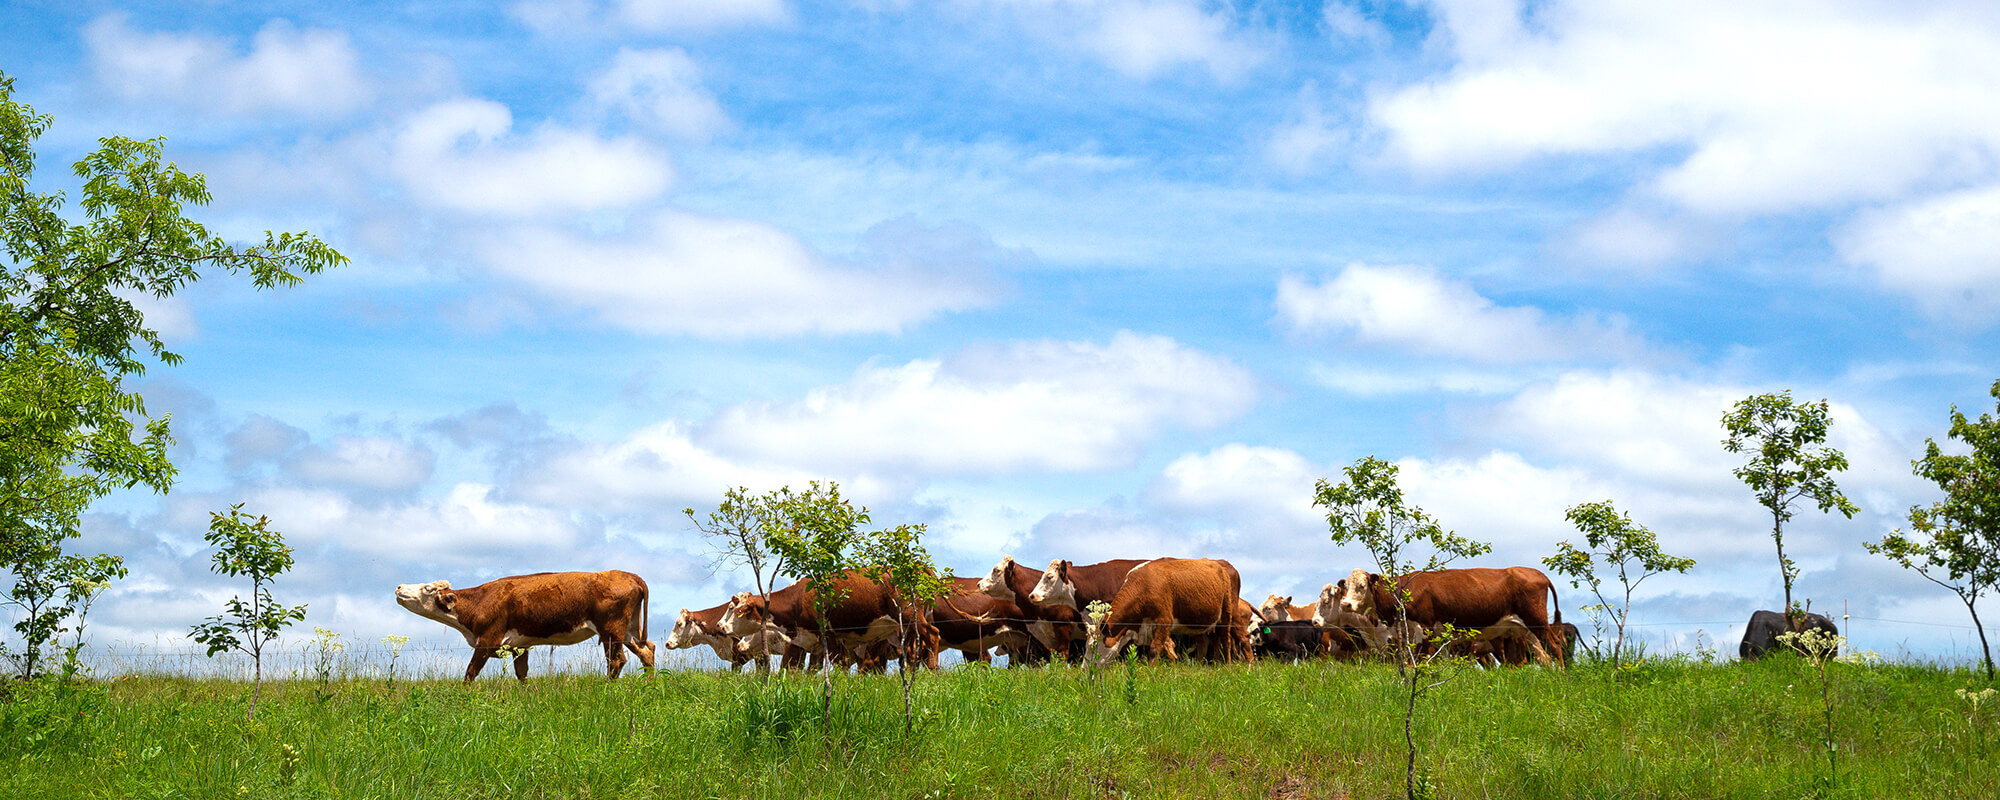 Cattle on hill in green pasture